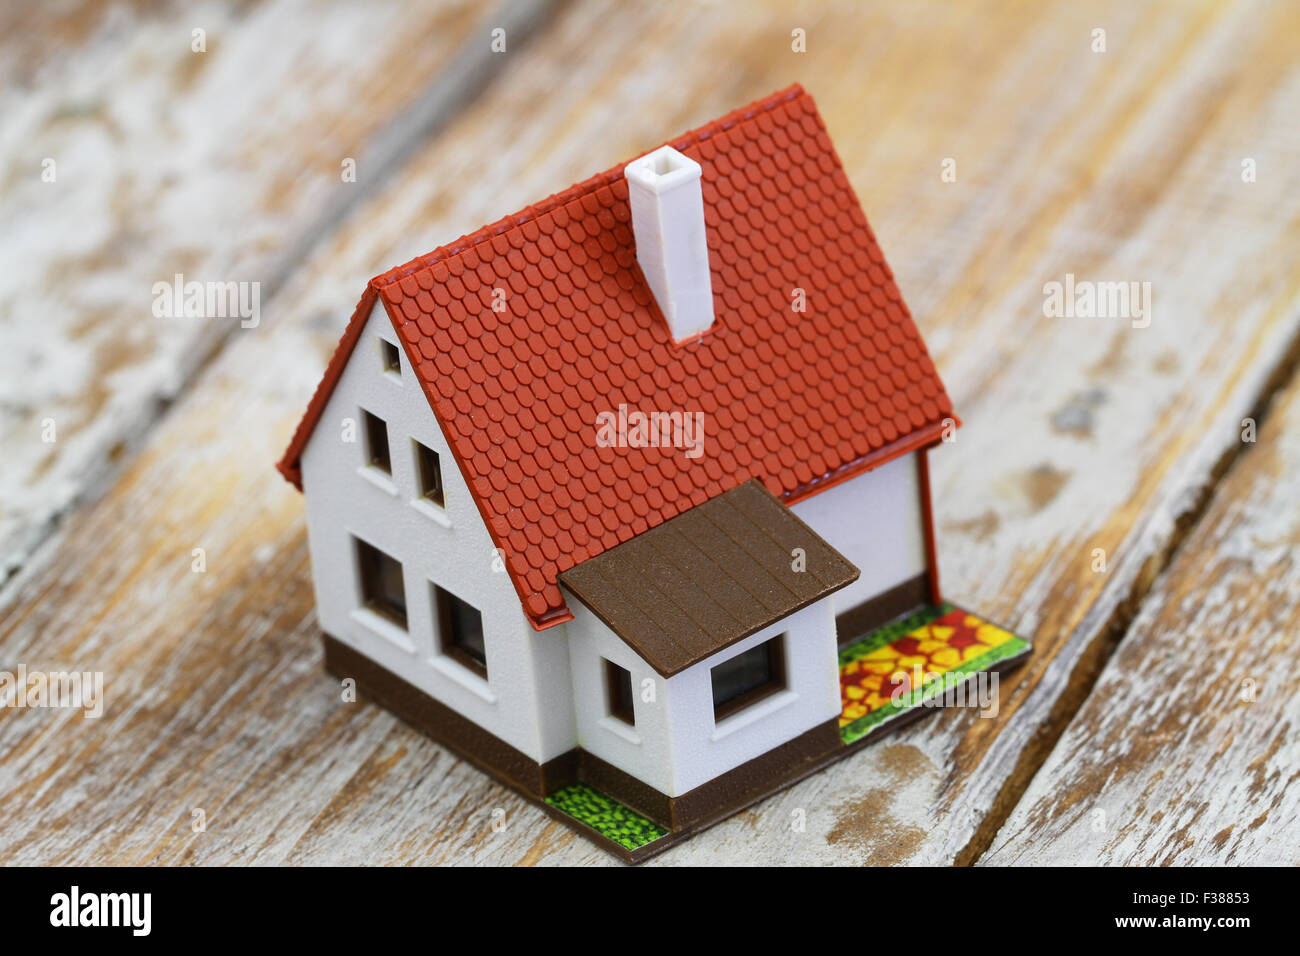 Model house on rustic wooden surface, closeup Stock Photo